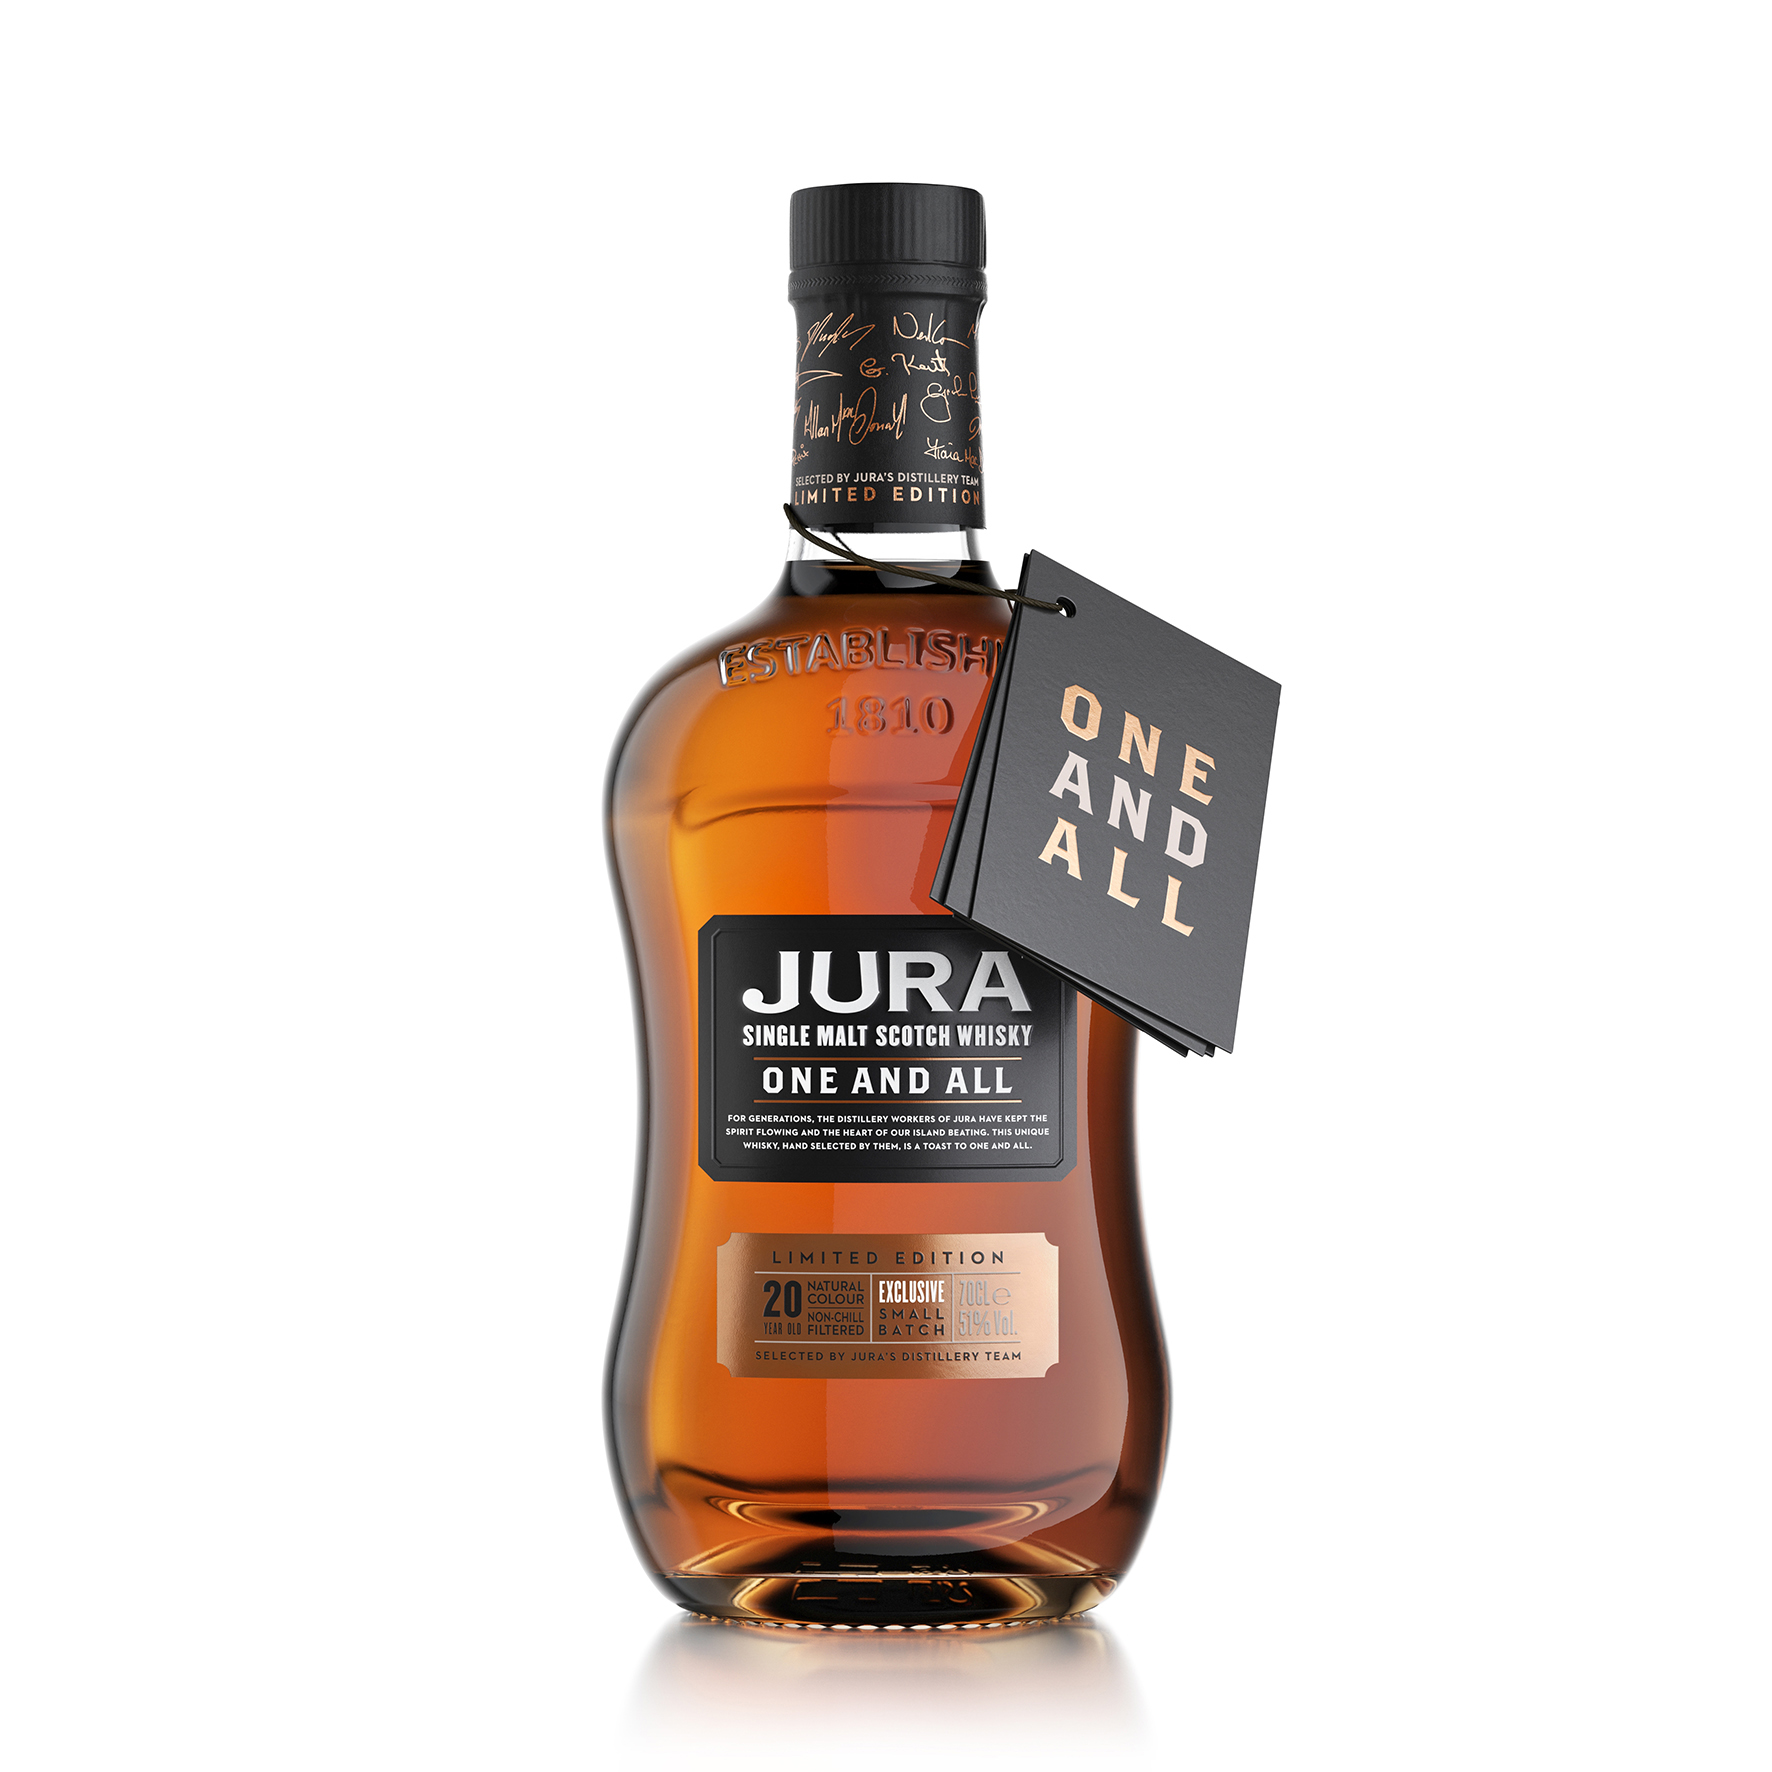 Jura "One and All"